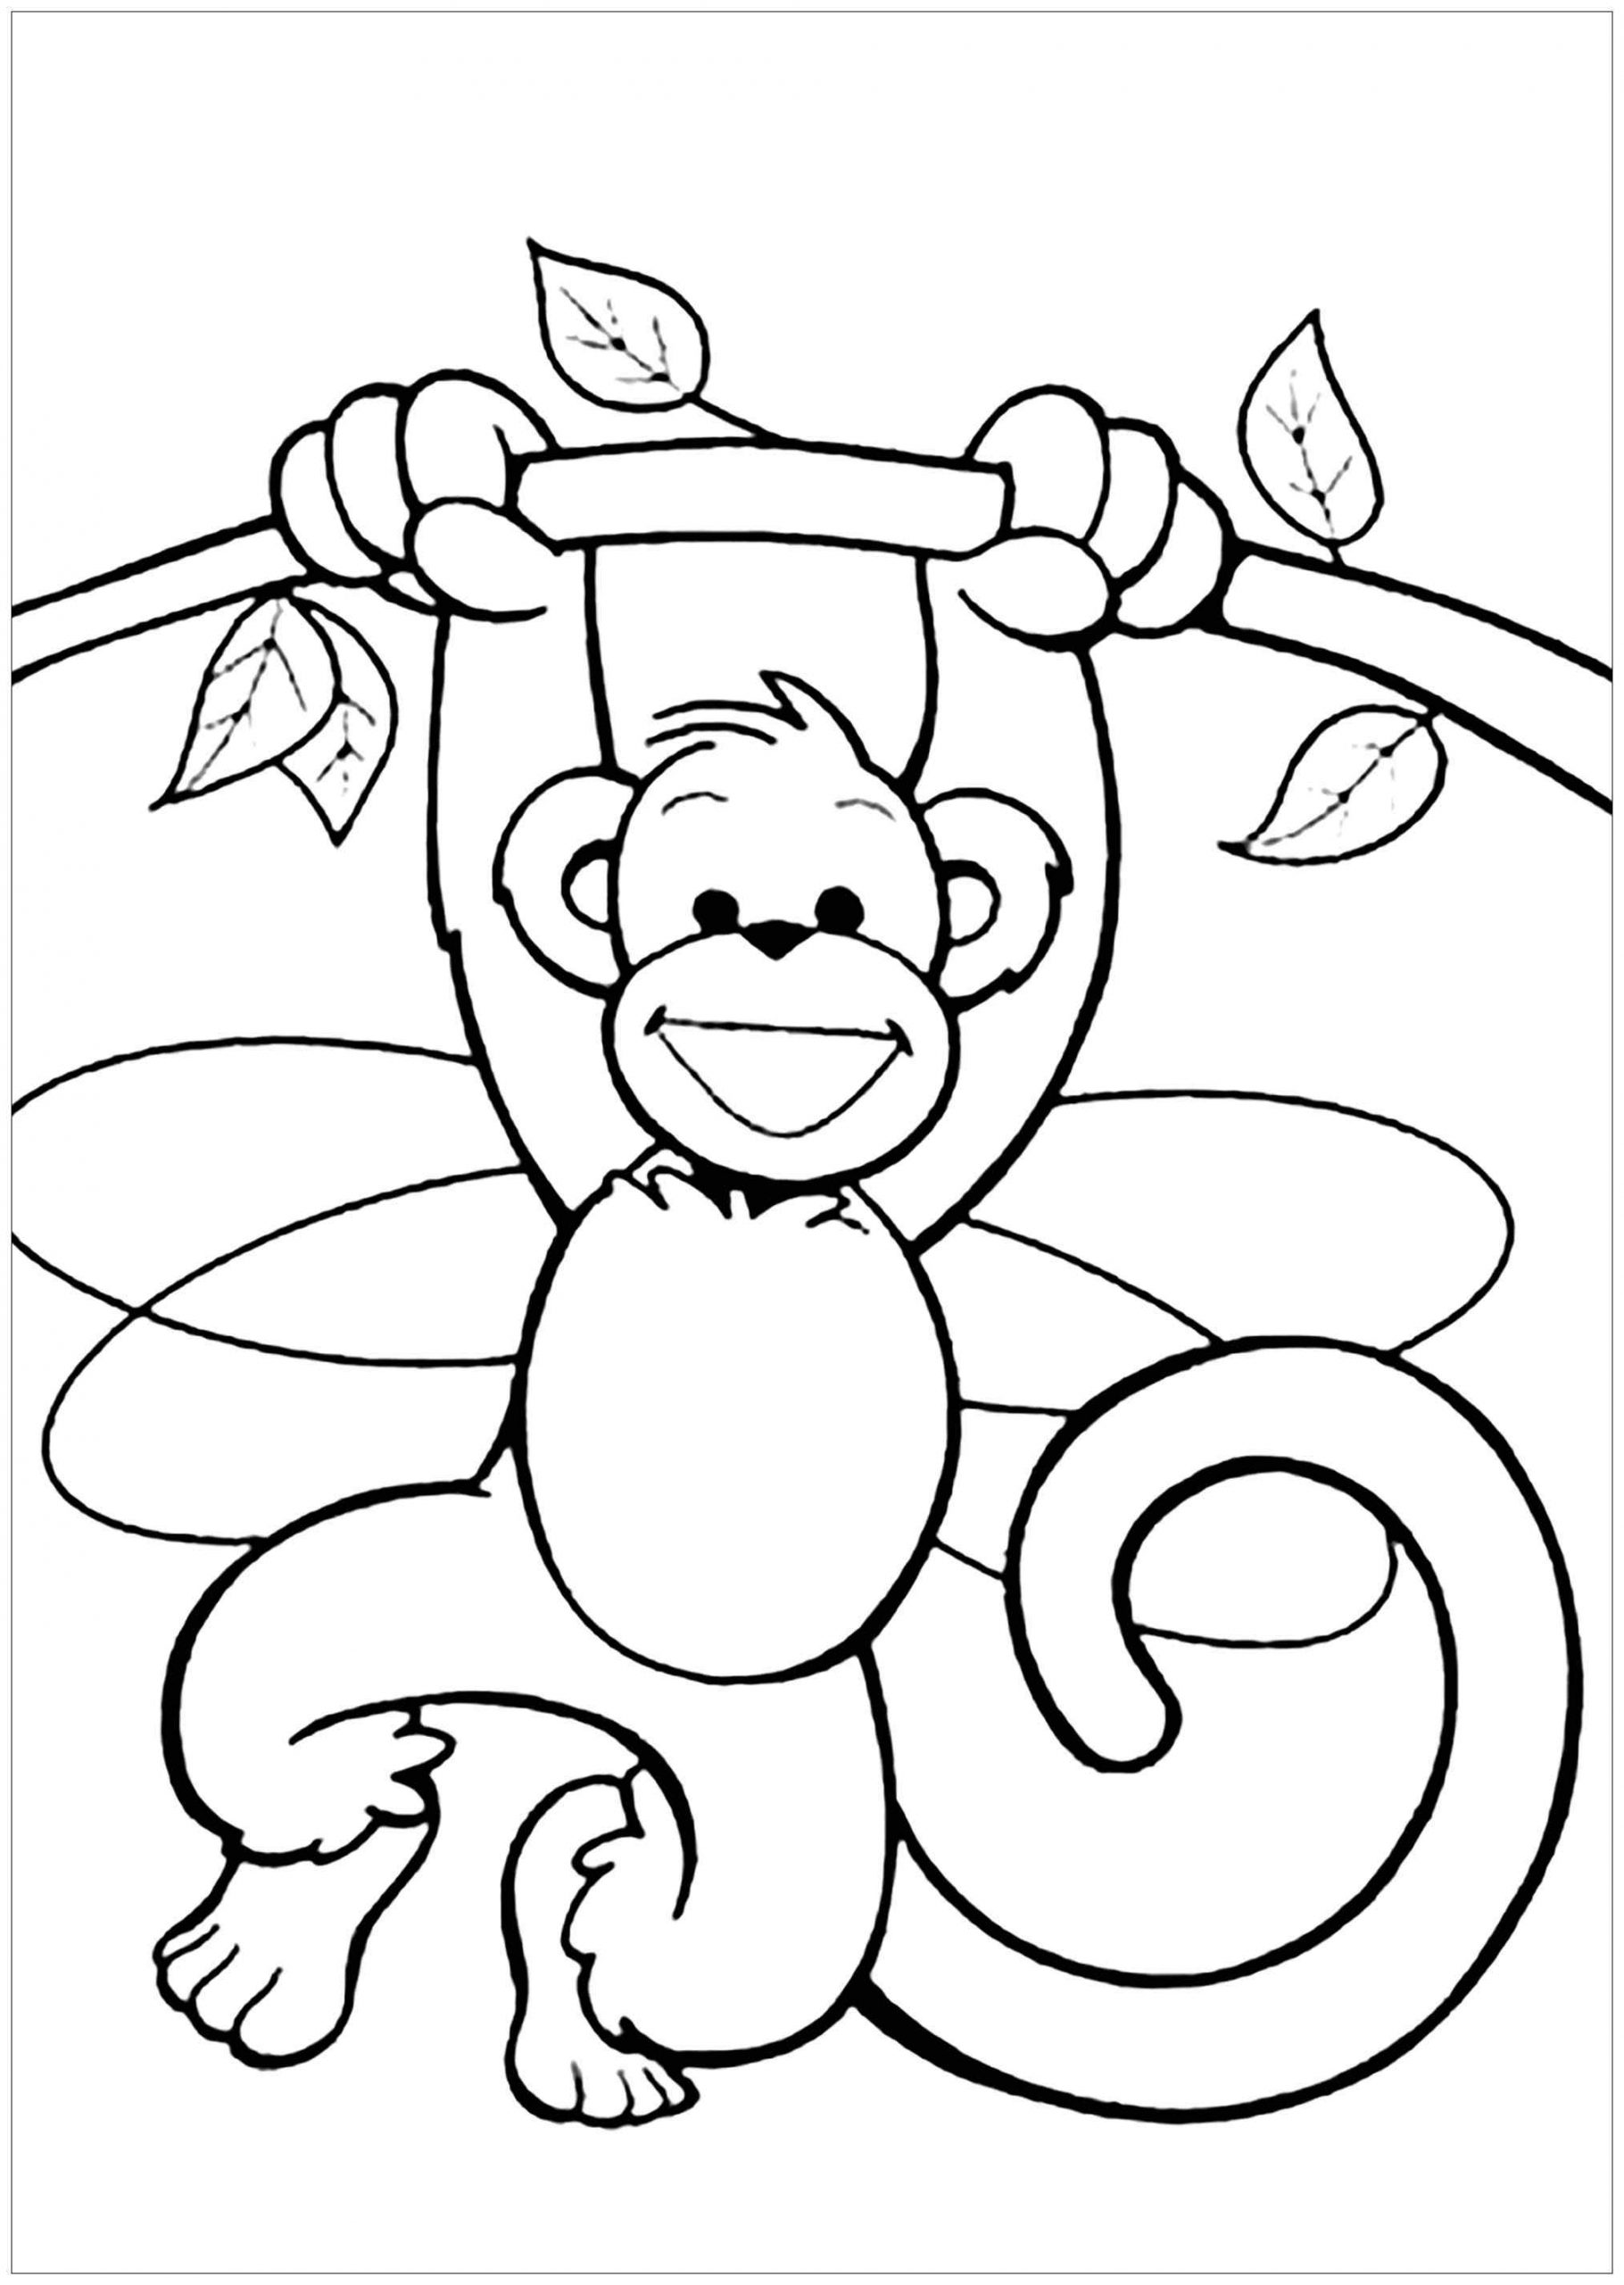 Cute Printable Monkey Coloring Page